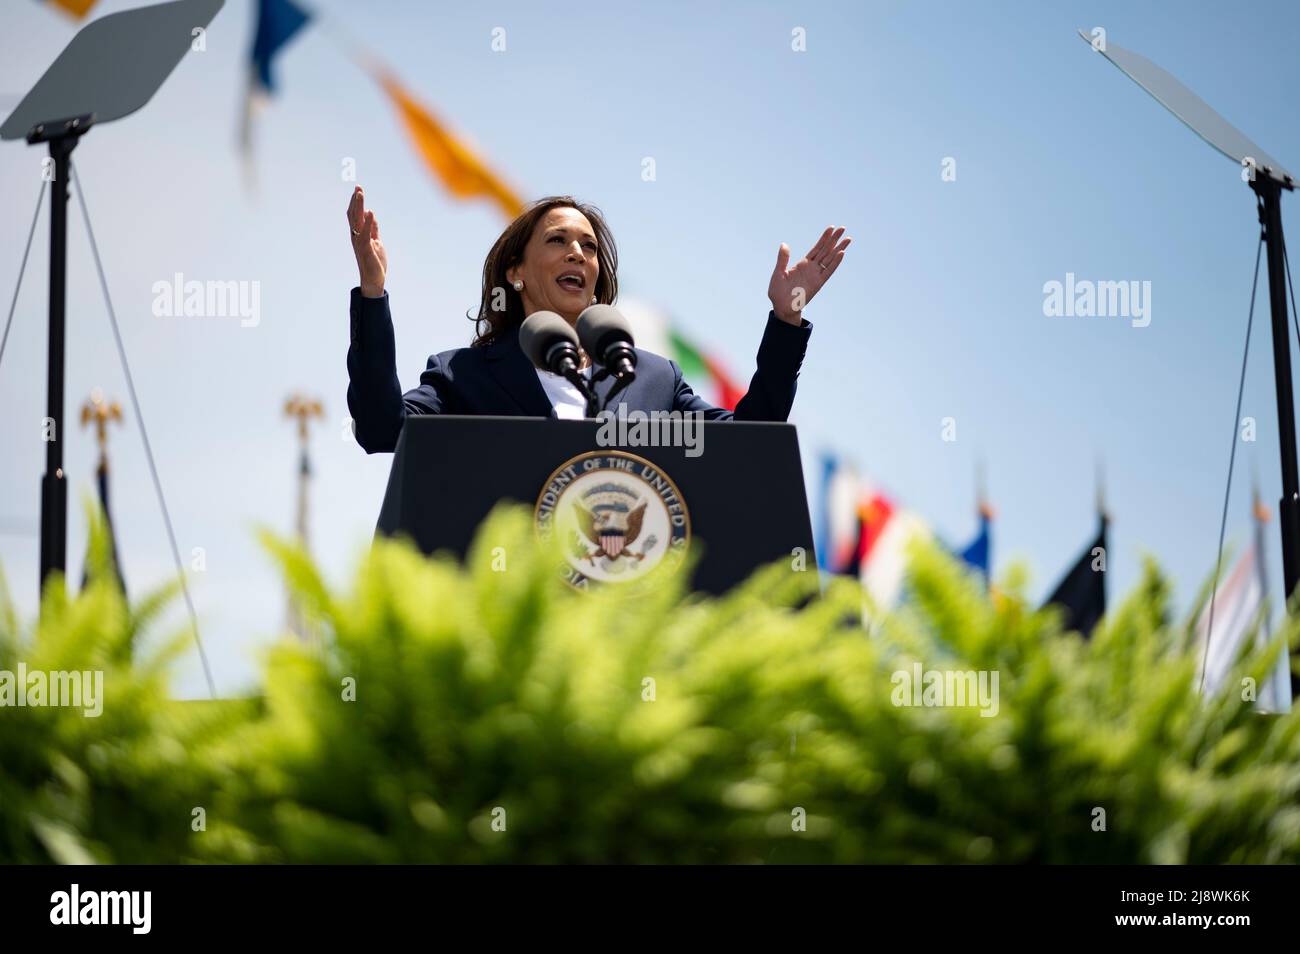 New London, United States of America. 18 May, 2022. U.S. Vice President Kamala Harris, delivers the commencement address during graduation ceremonies at the Coast Guard Academy, May 18, 2022 in New London, Connecticut. The Coast Guard Academy graduated 252 new officers along with nine international students. Credit: PO3 Matthew Thieme/U.S. Coast Guard Photo/Alamy Live News Stock Photo